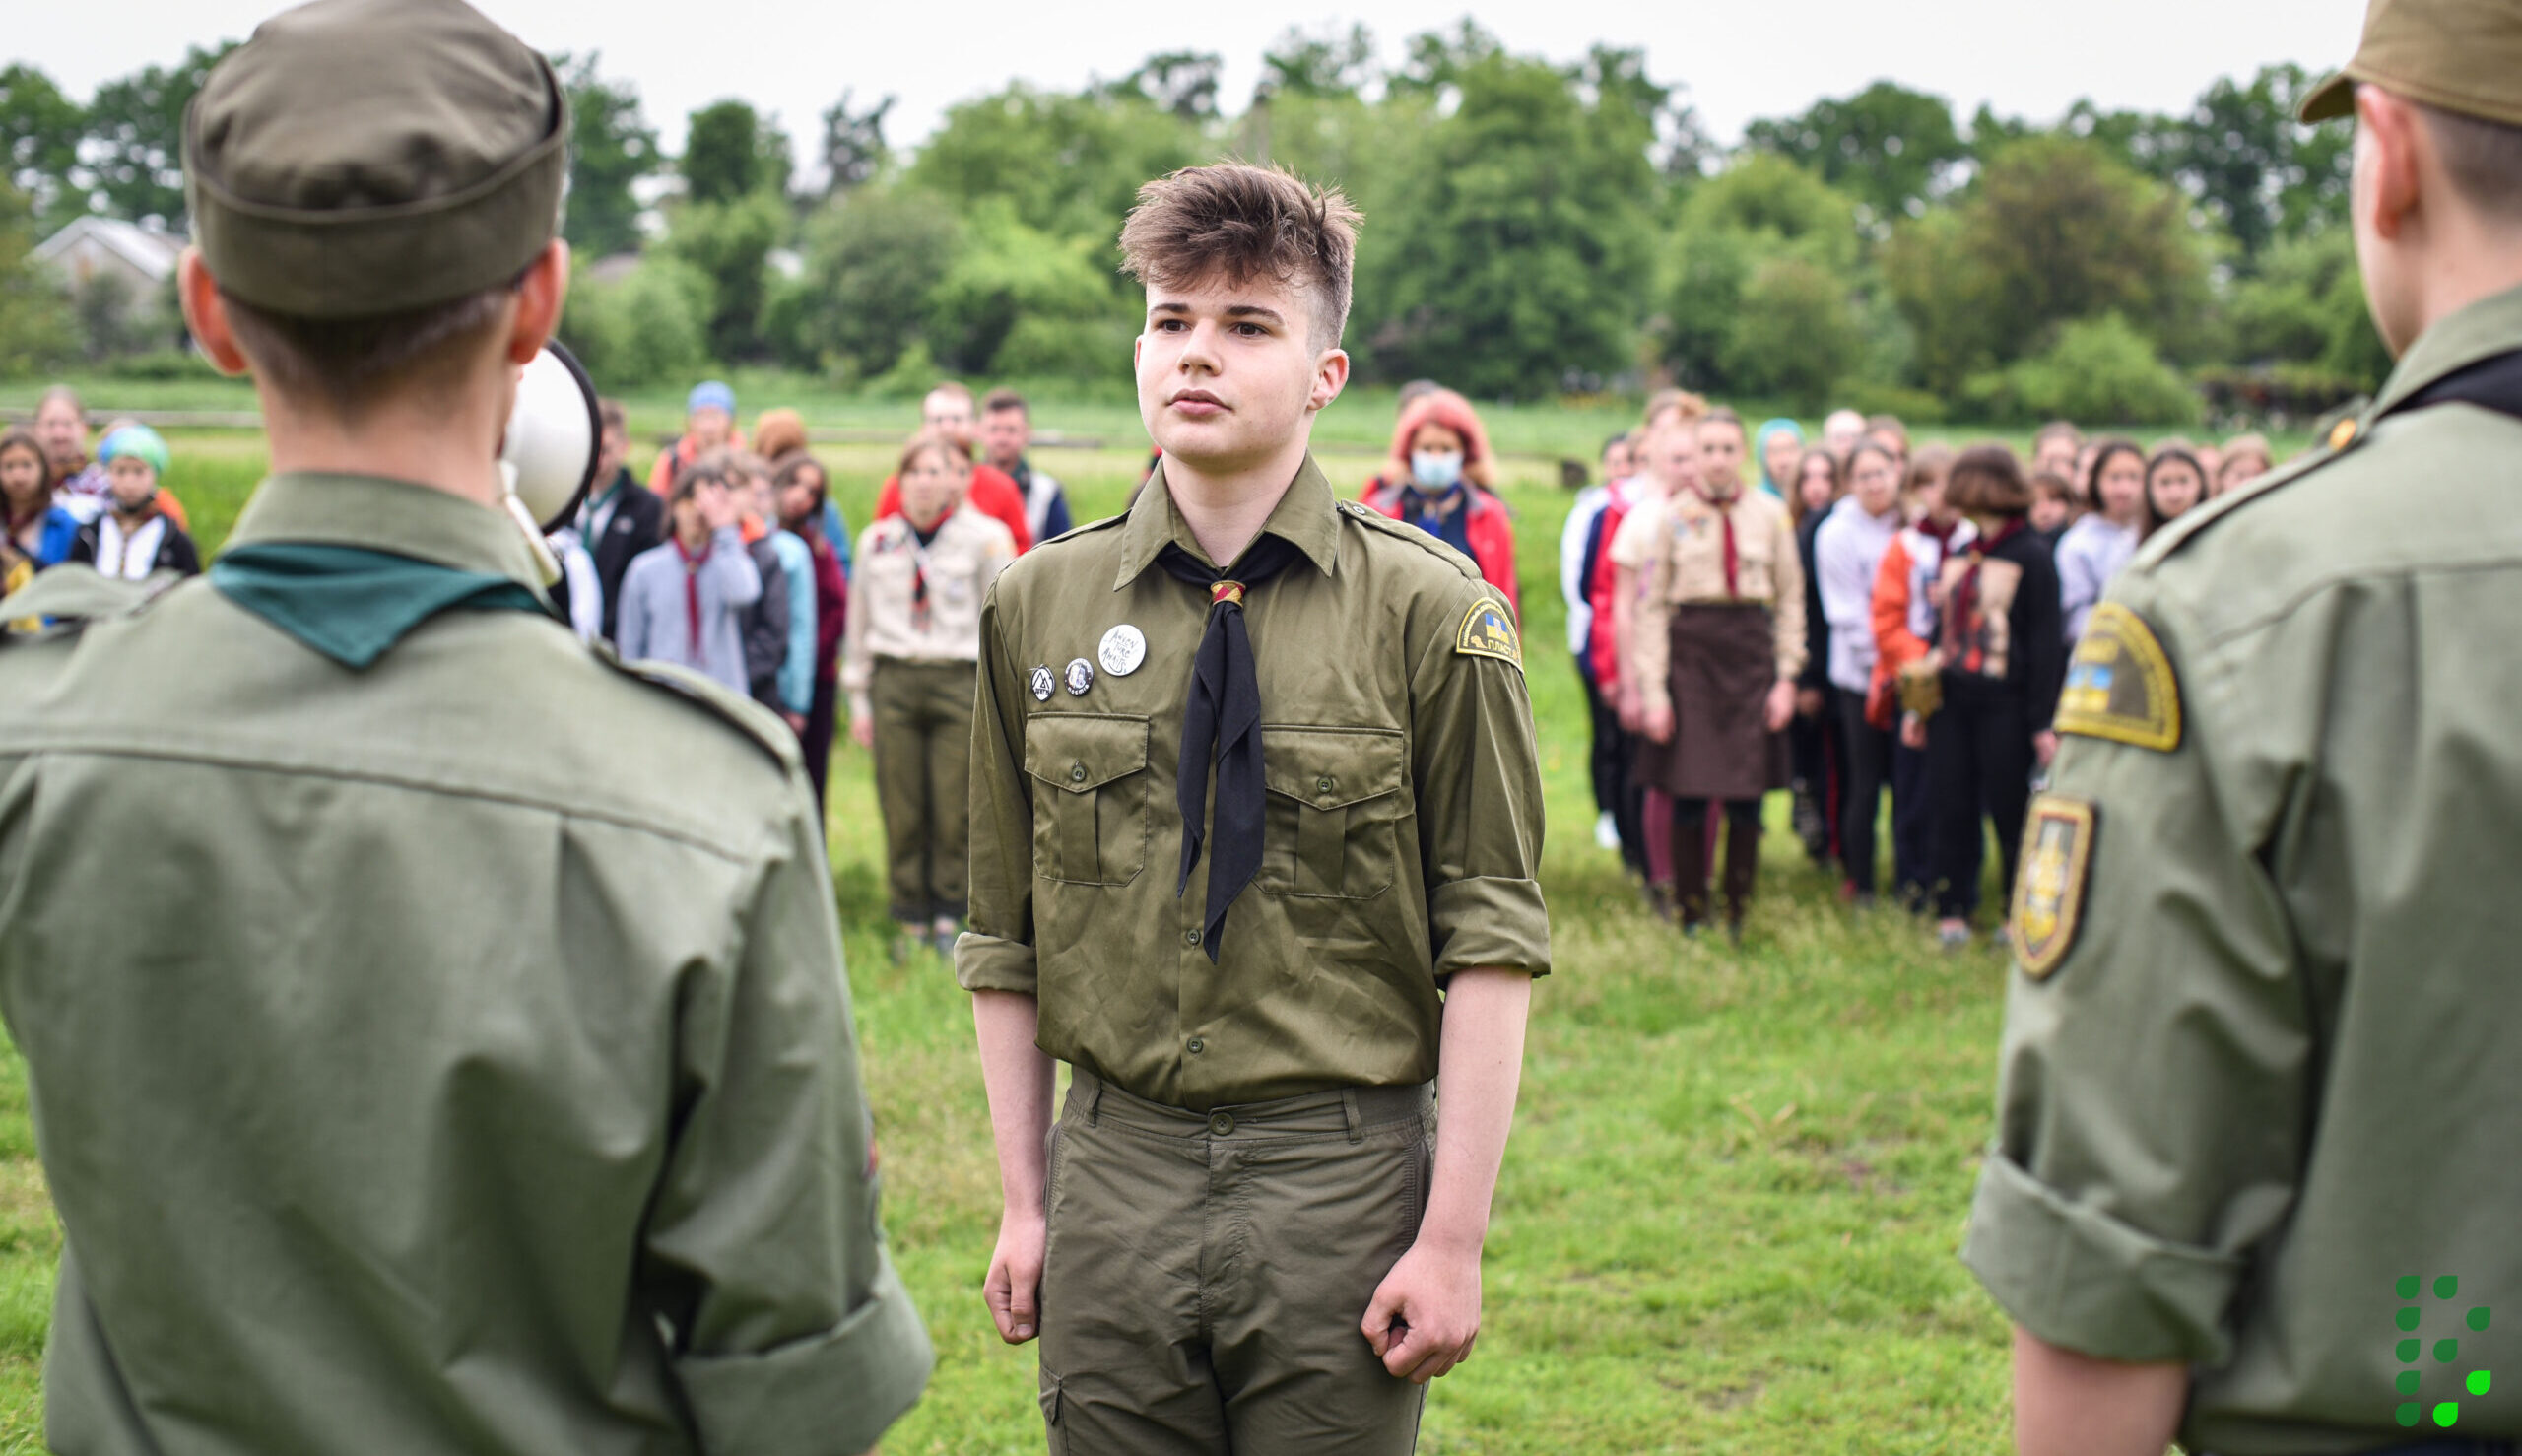 Plast scouts perform their professional and civil duties